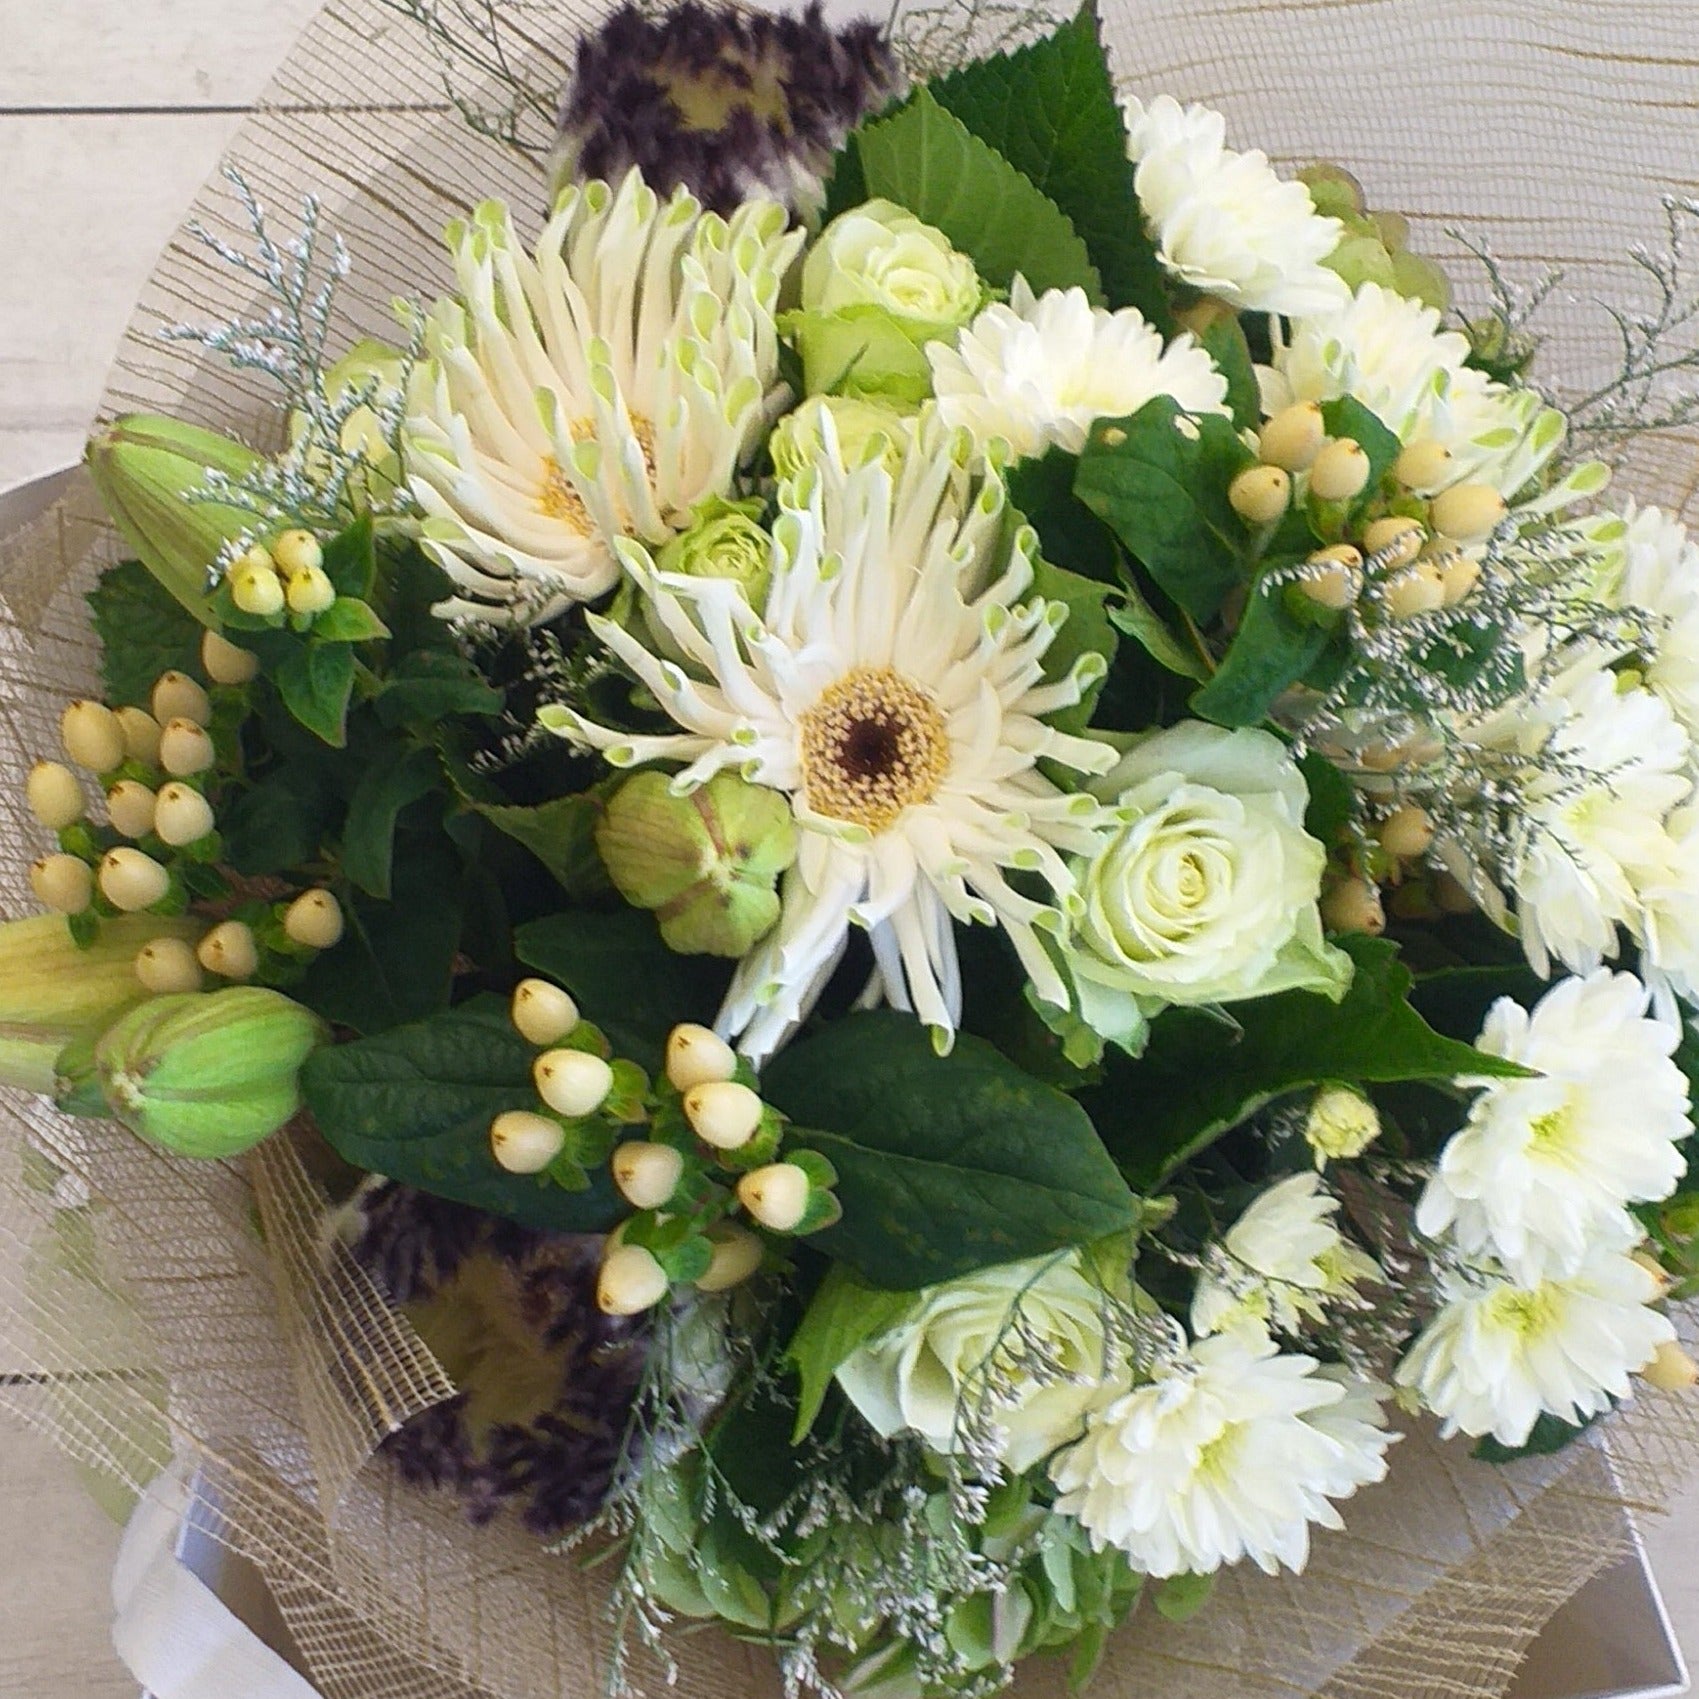 A beautiful bouquet of cream and green flowers including green roses, berries, protea, chrysies, lilies and gerberas.